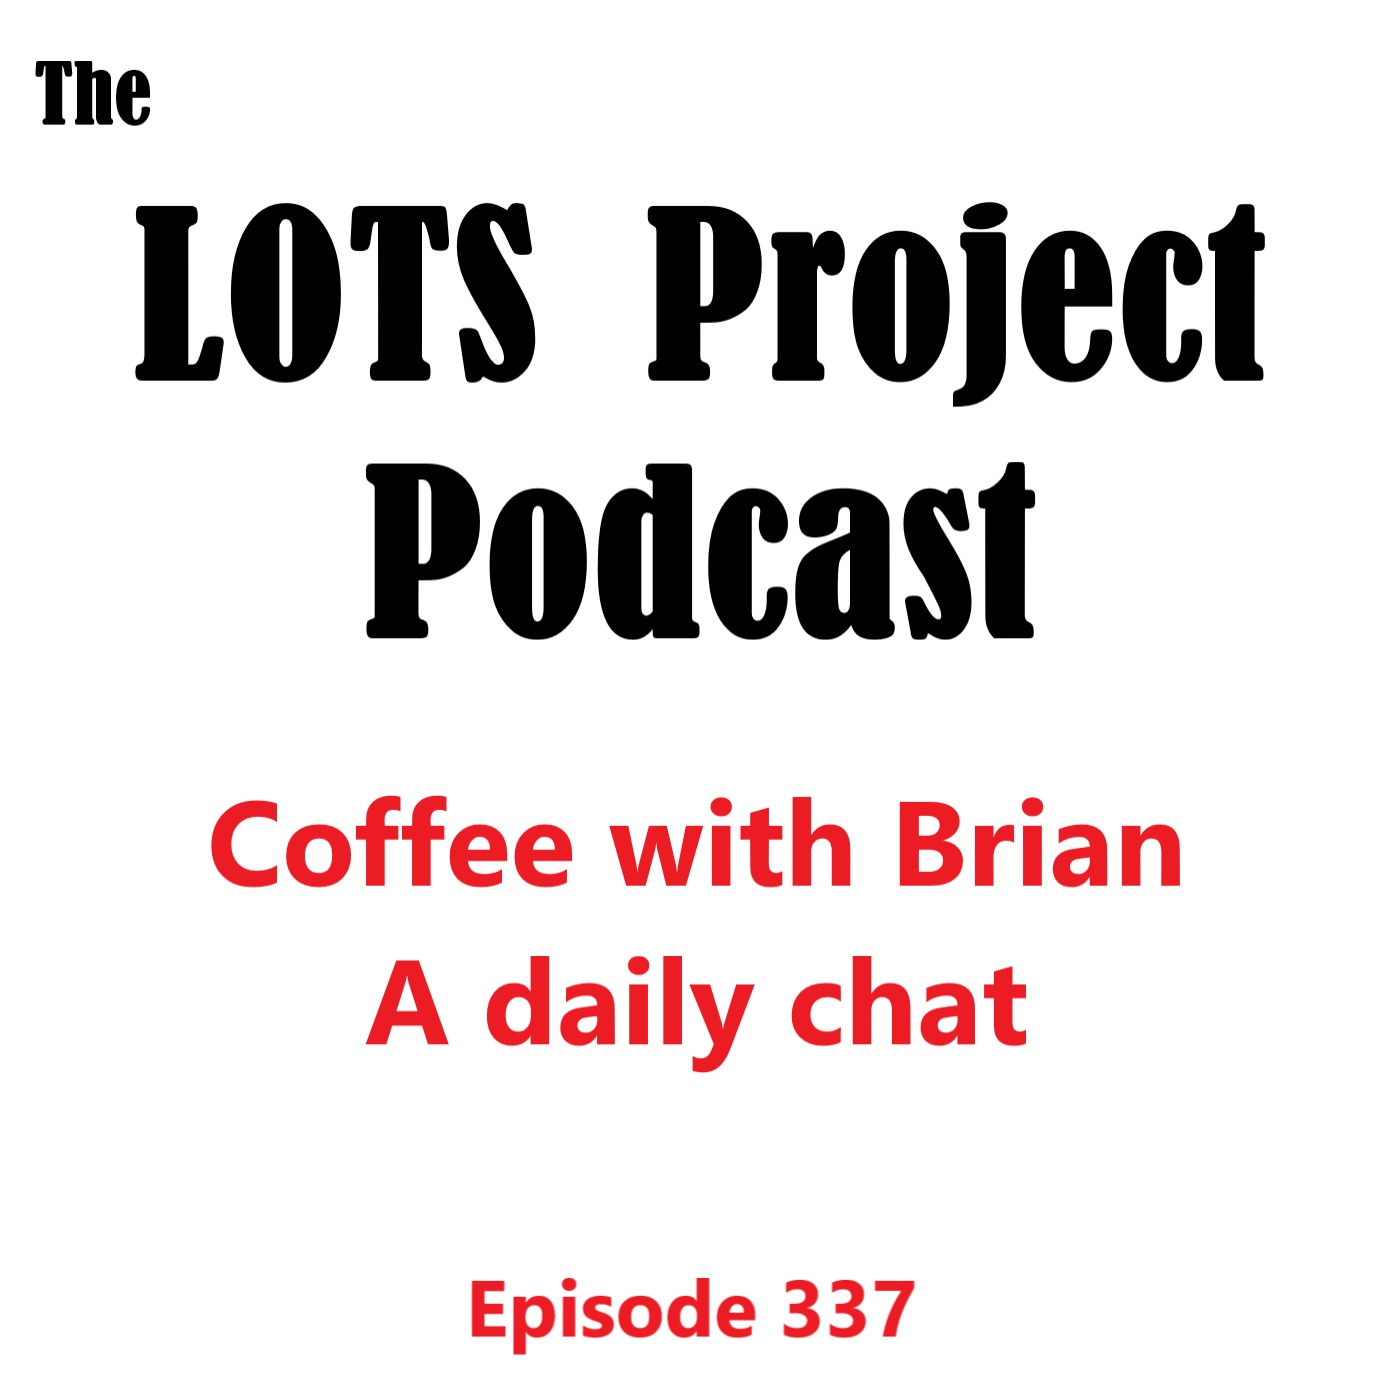 Episode 337 Coffee with Brian, A Daily Morning Chat #podcast #daily #nomad #coffee